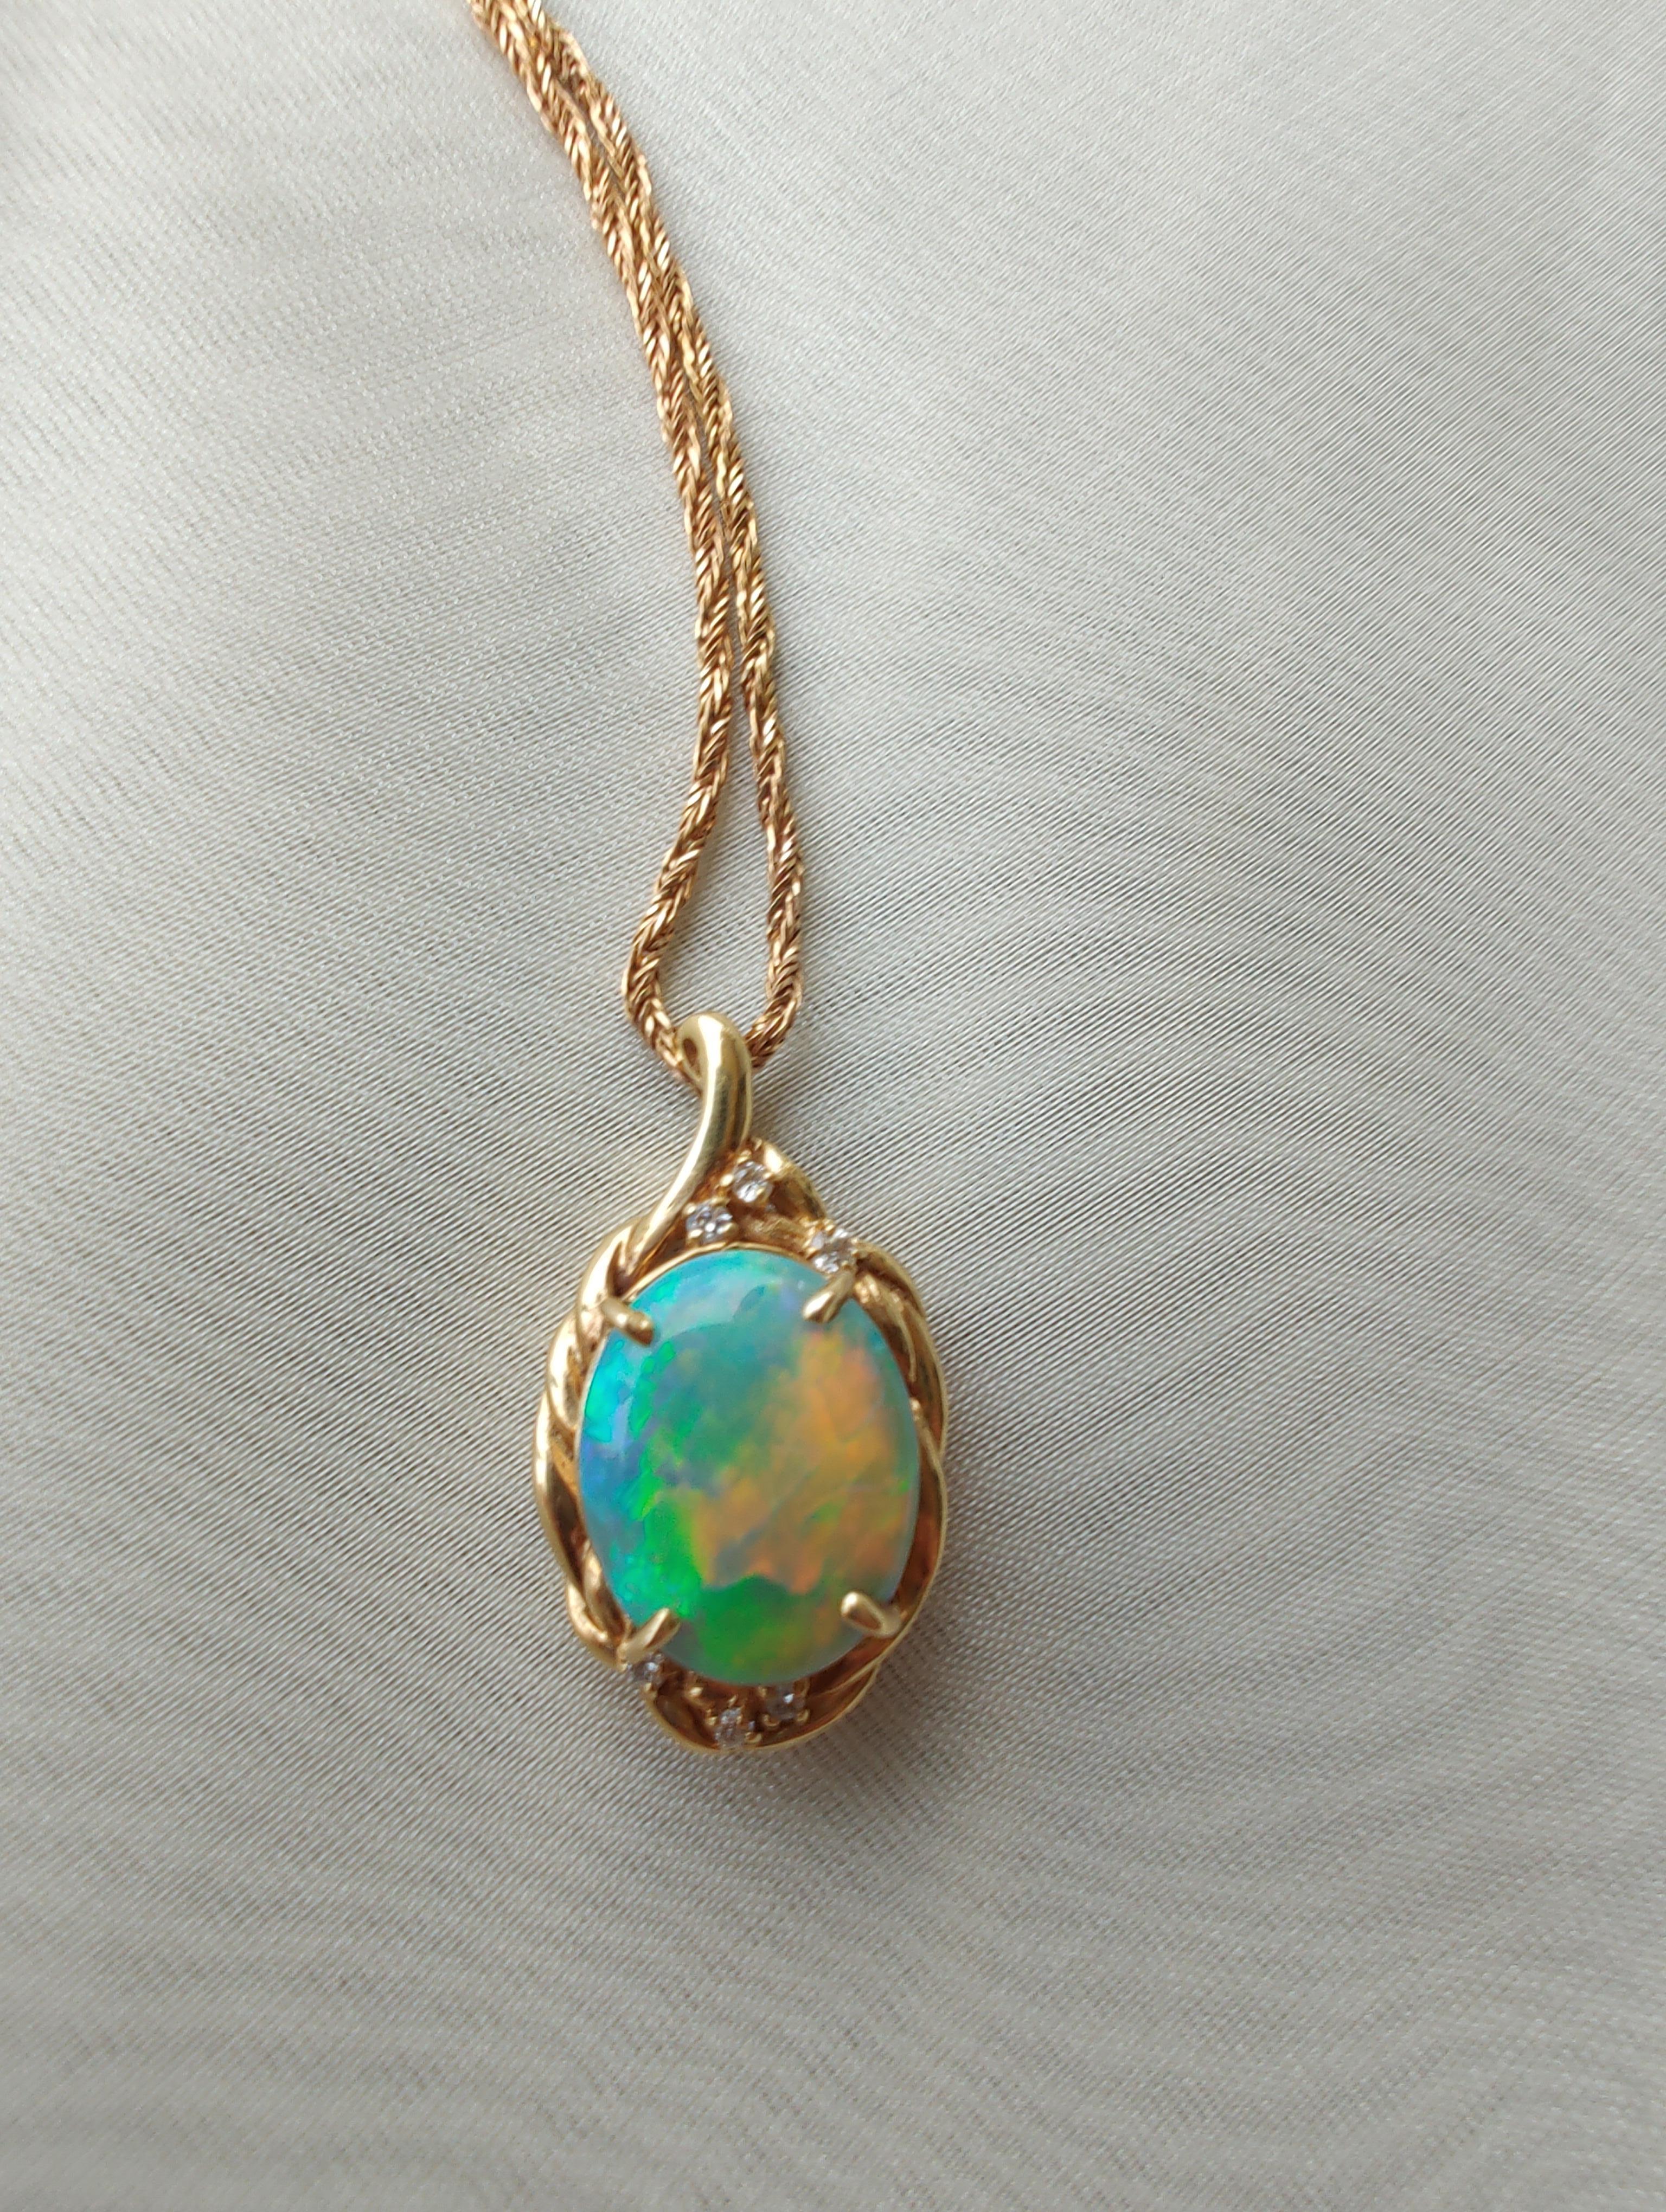 Set in our signature 18ct Yellow Gold, this pendant features a rare, natural solid 4.946ct Australian Black Opal
 (14.8 x 11.7 x 5.2mm) as its centre stone, showcasing the dazzling colours of the rainbow . This vibrancy of colour makes black opal